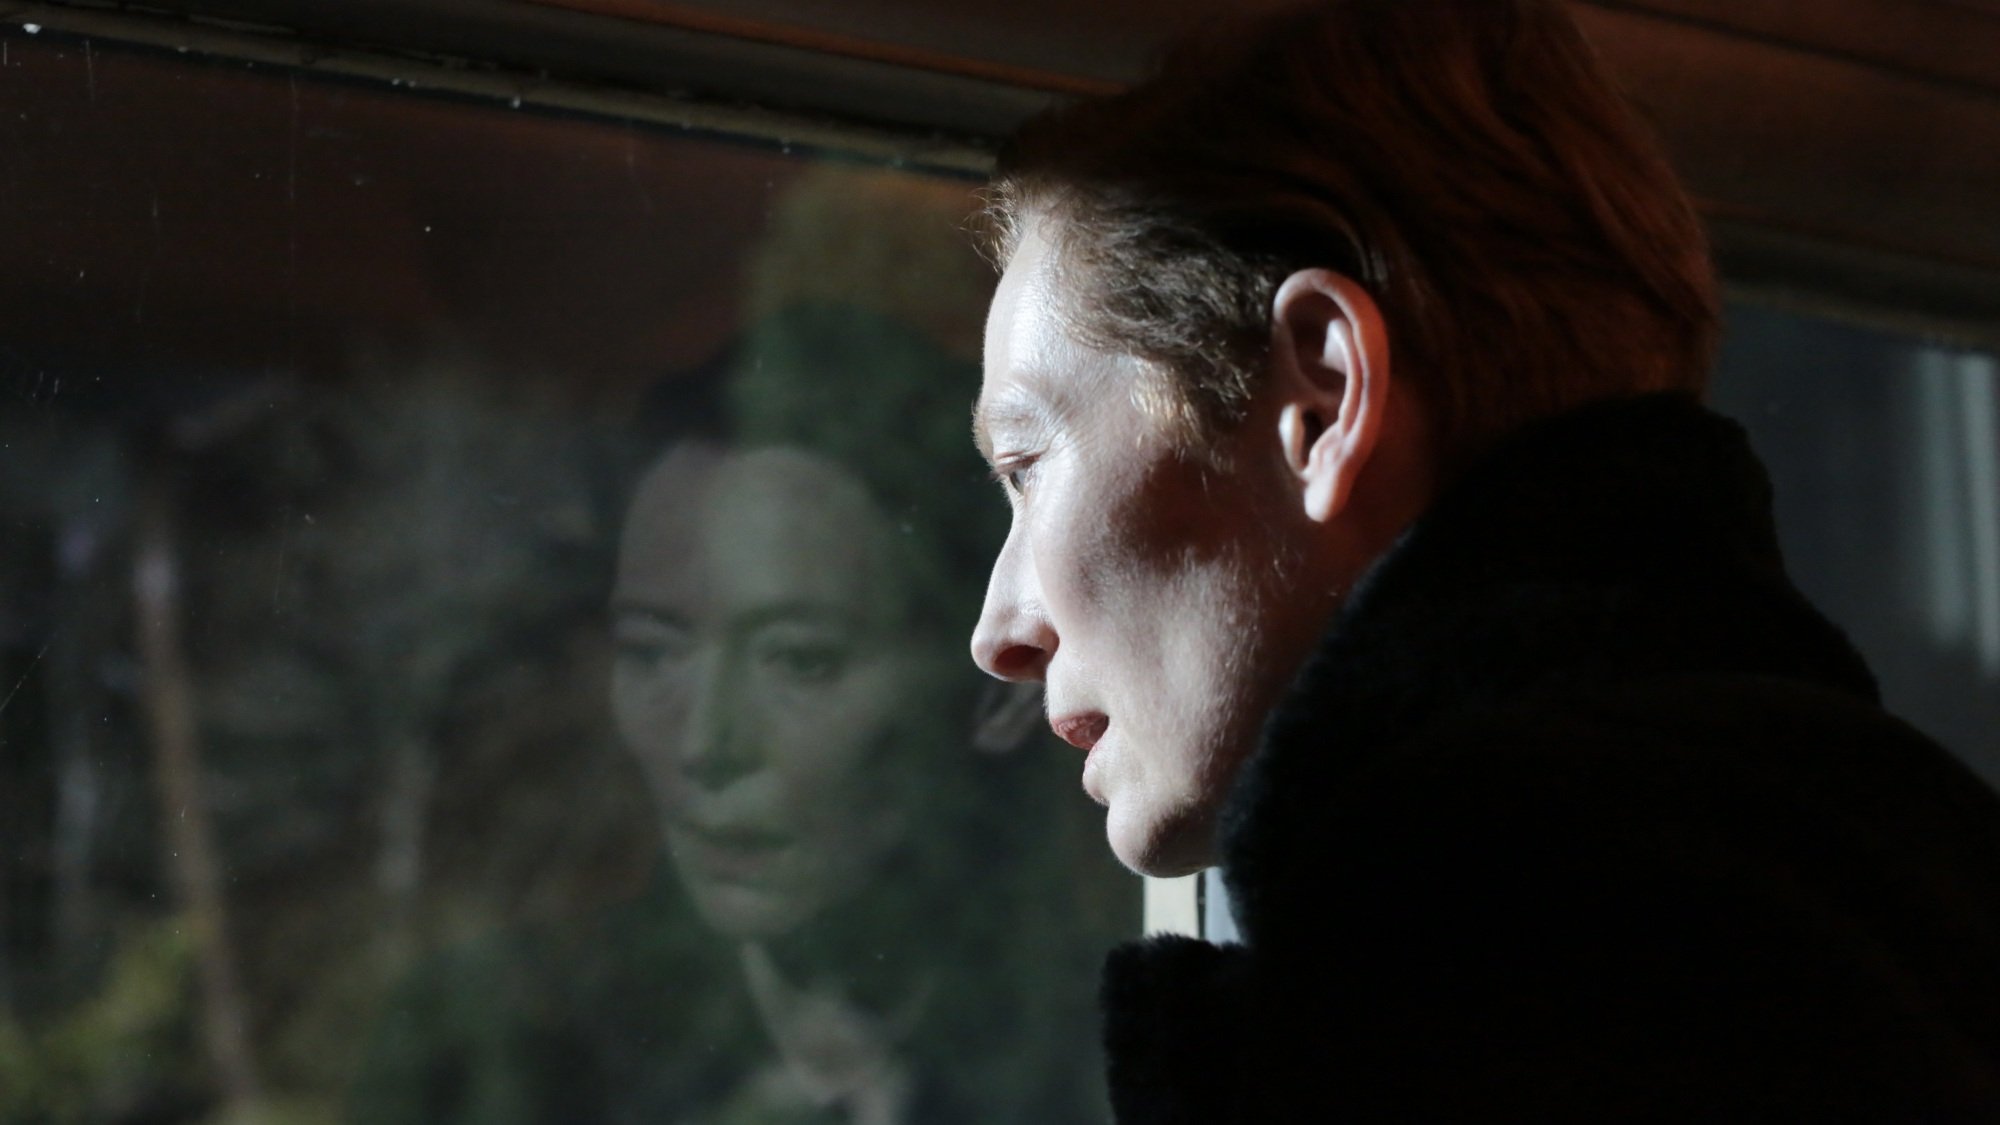 A woman looks out a window — her face is reflected in the glass.